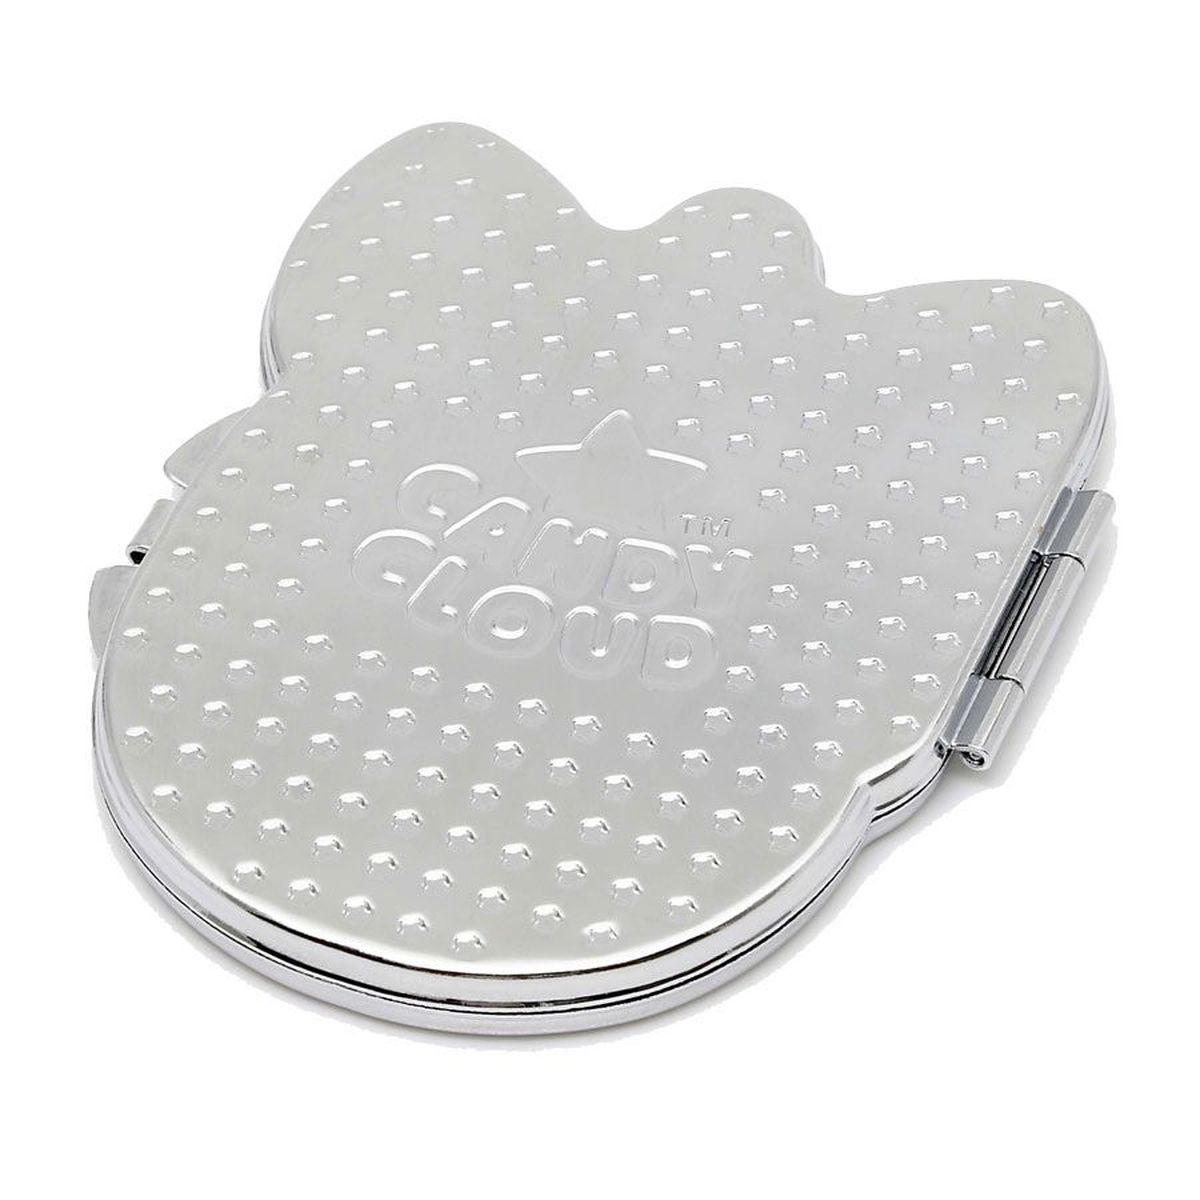 Candy Cloud Compact Mirror - Daisy